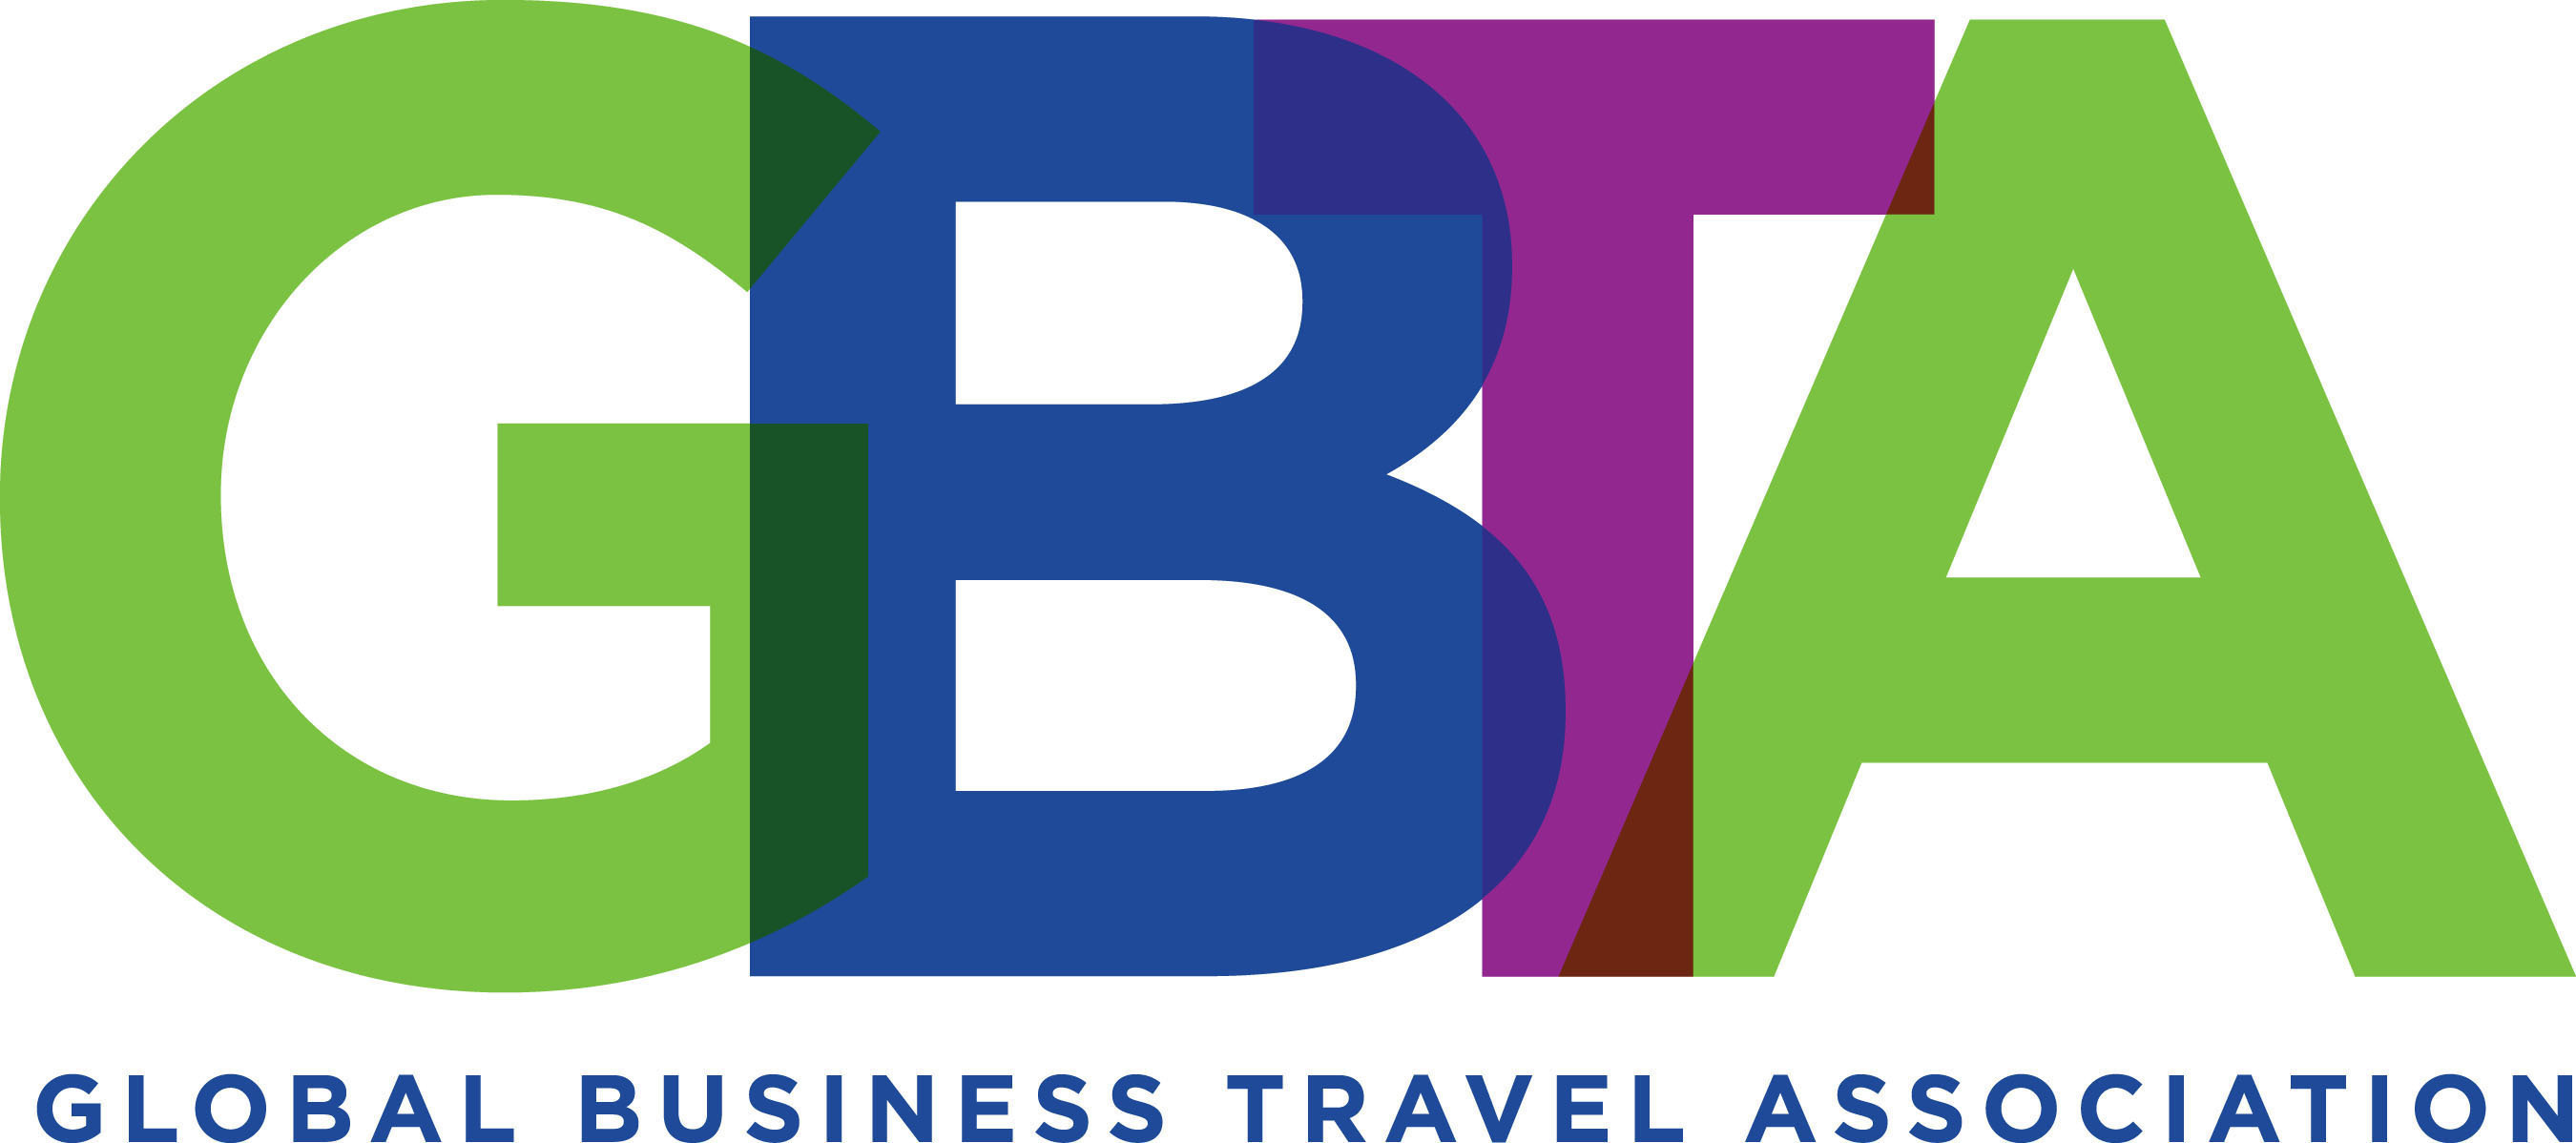 The Global Business Travel Association. (PRNewsFoto/Global Business Travel Association) (PRNewsFoto/)